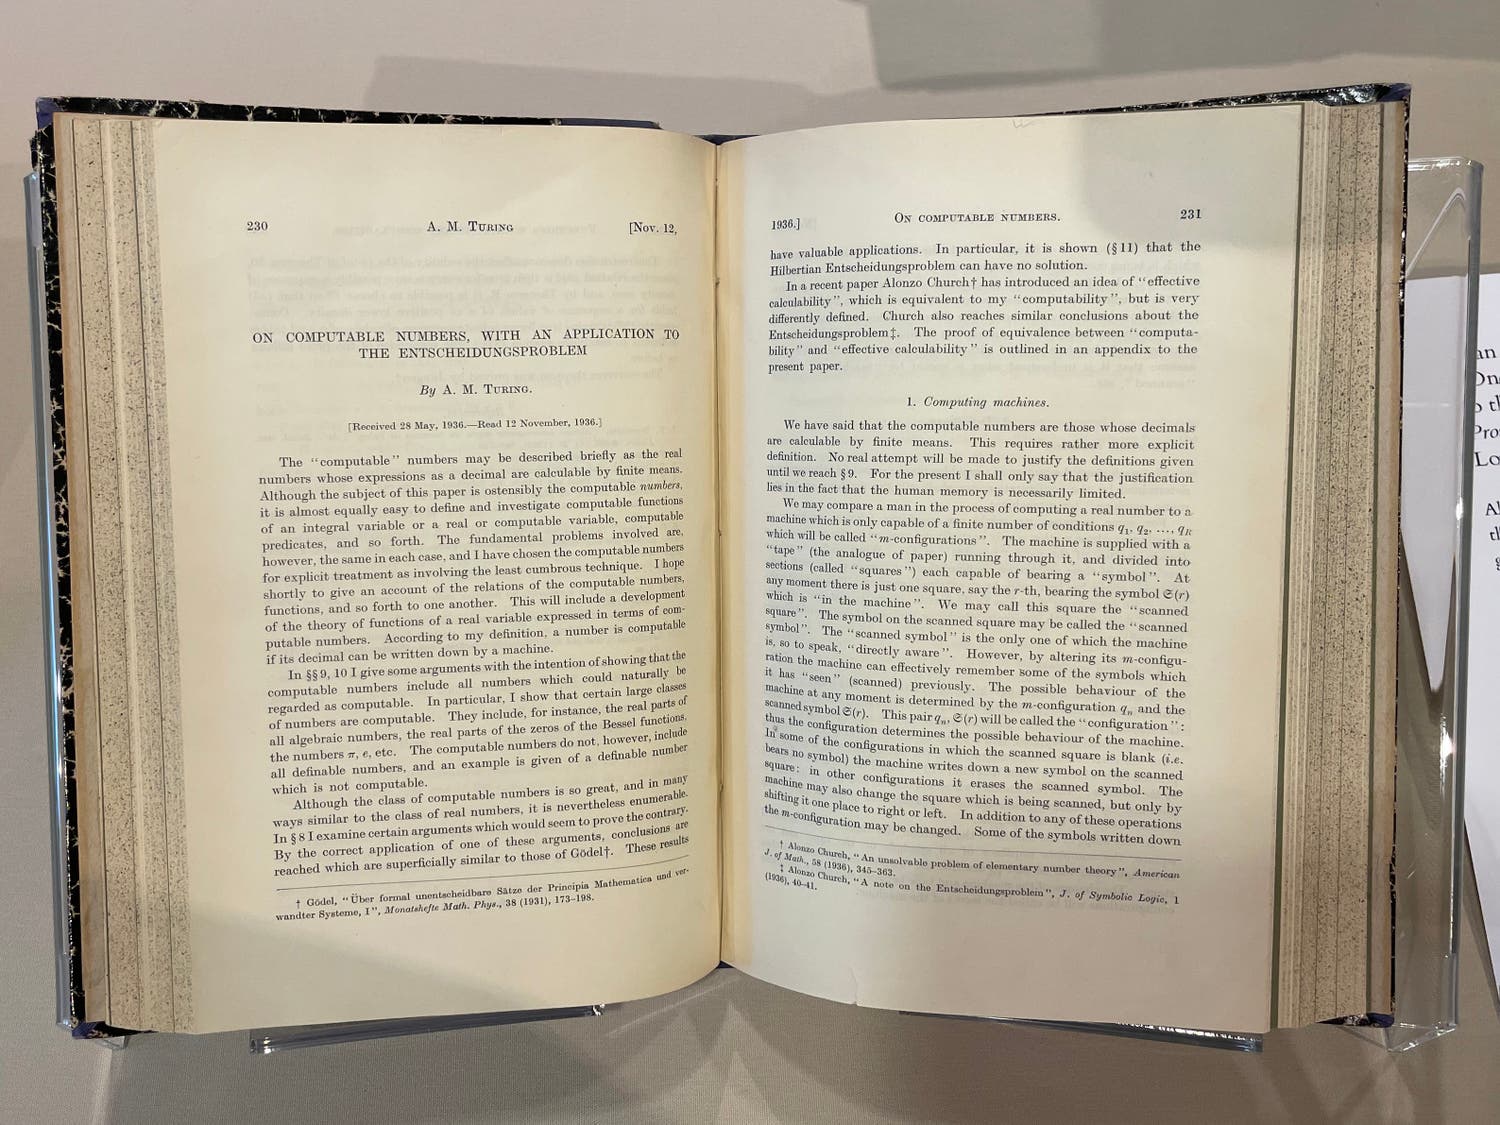 Photo of book containing writing by Alan Turing, “On Computable Numbers, with an Application to the Entscheidungsproblem.” Proceedings of the London Mathematical Society. London, 1936.